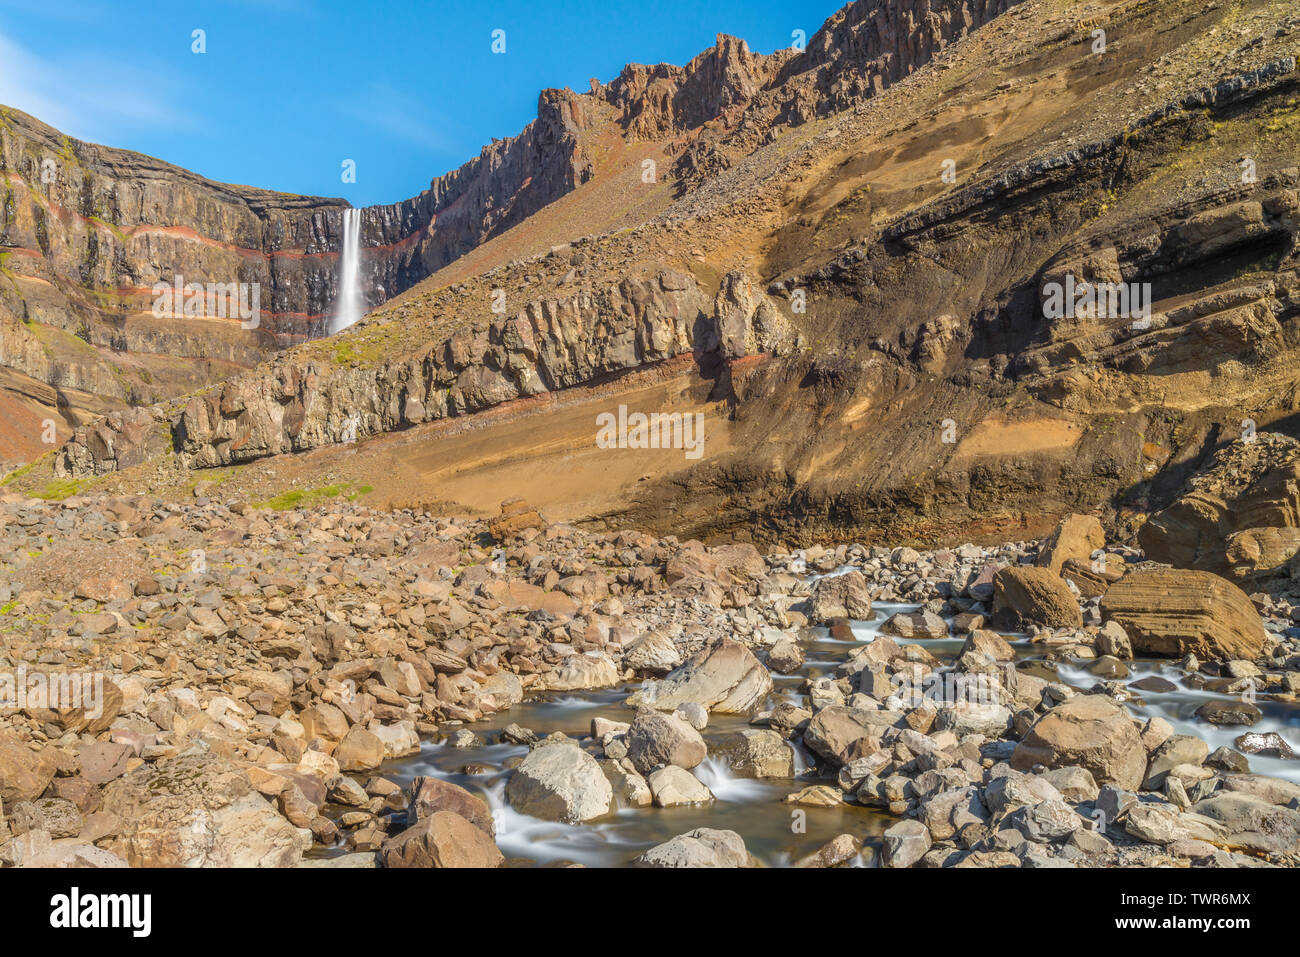 Hengifoss waterfall flowing down the canyon. Rock layers stratified, geological formations seen along the canyon walls. Stock Photo